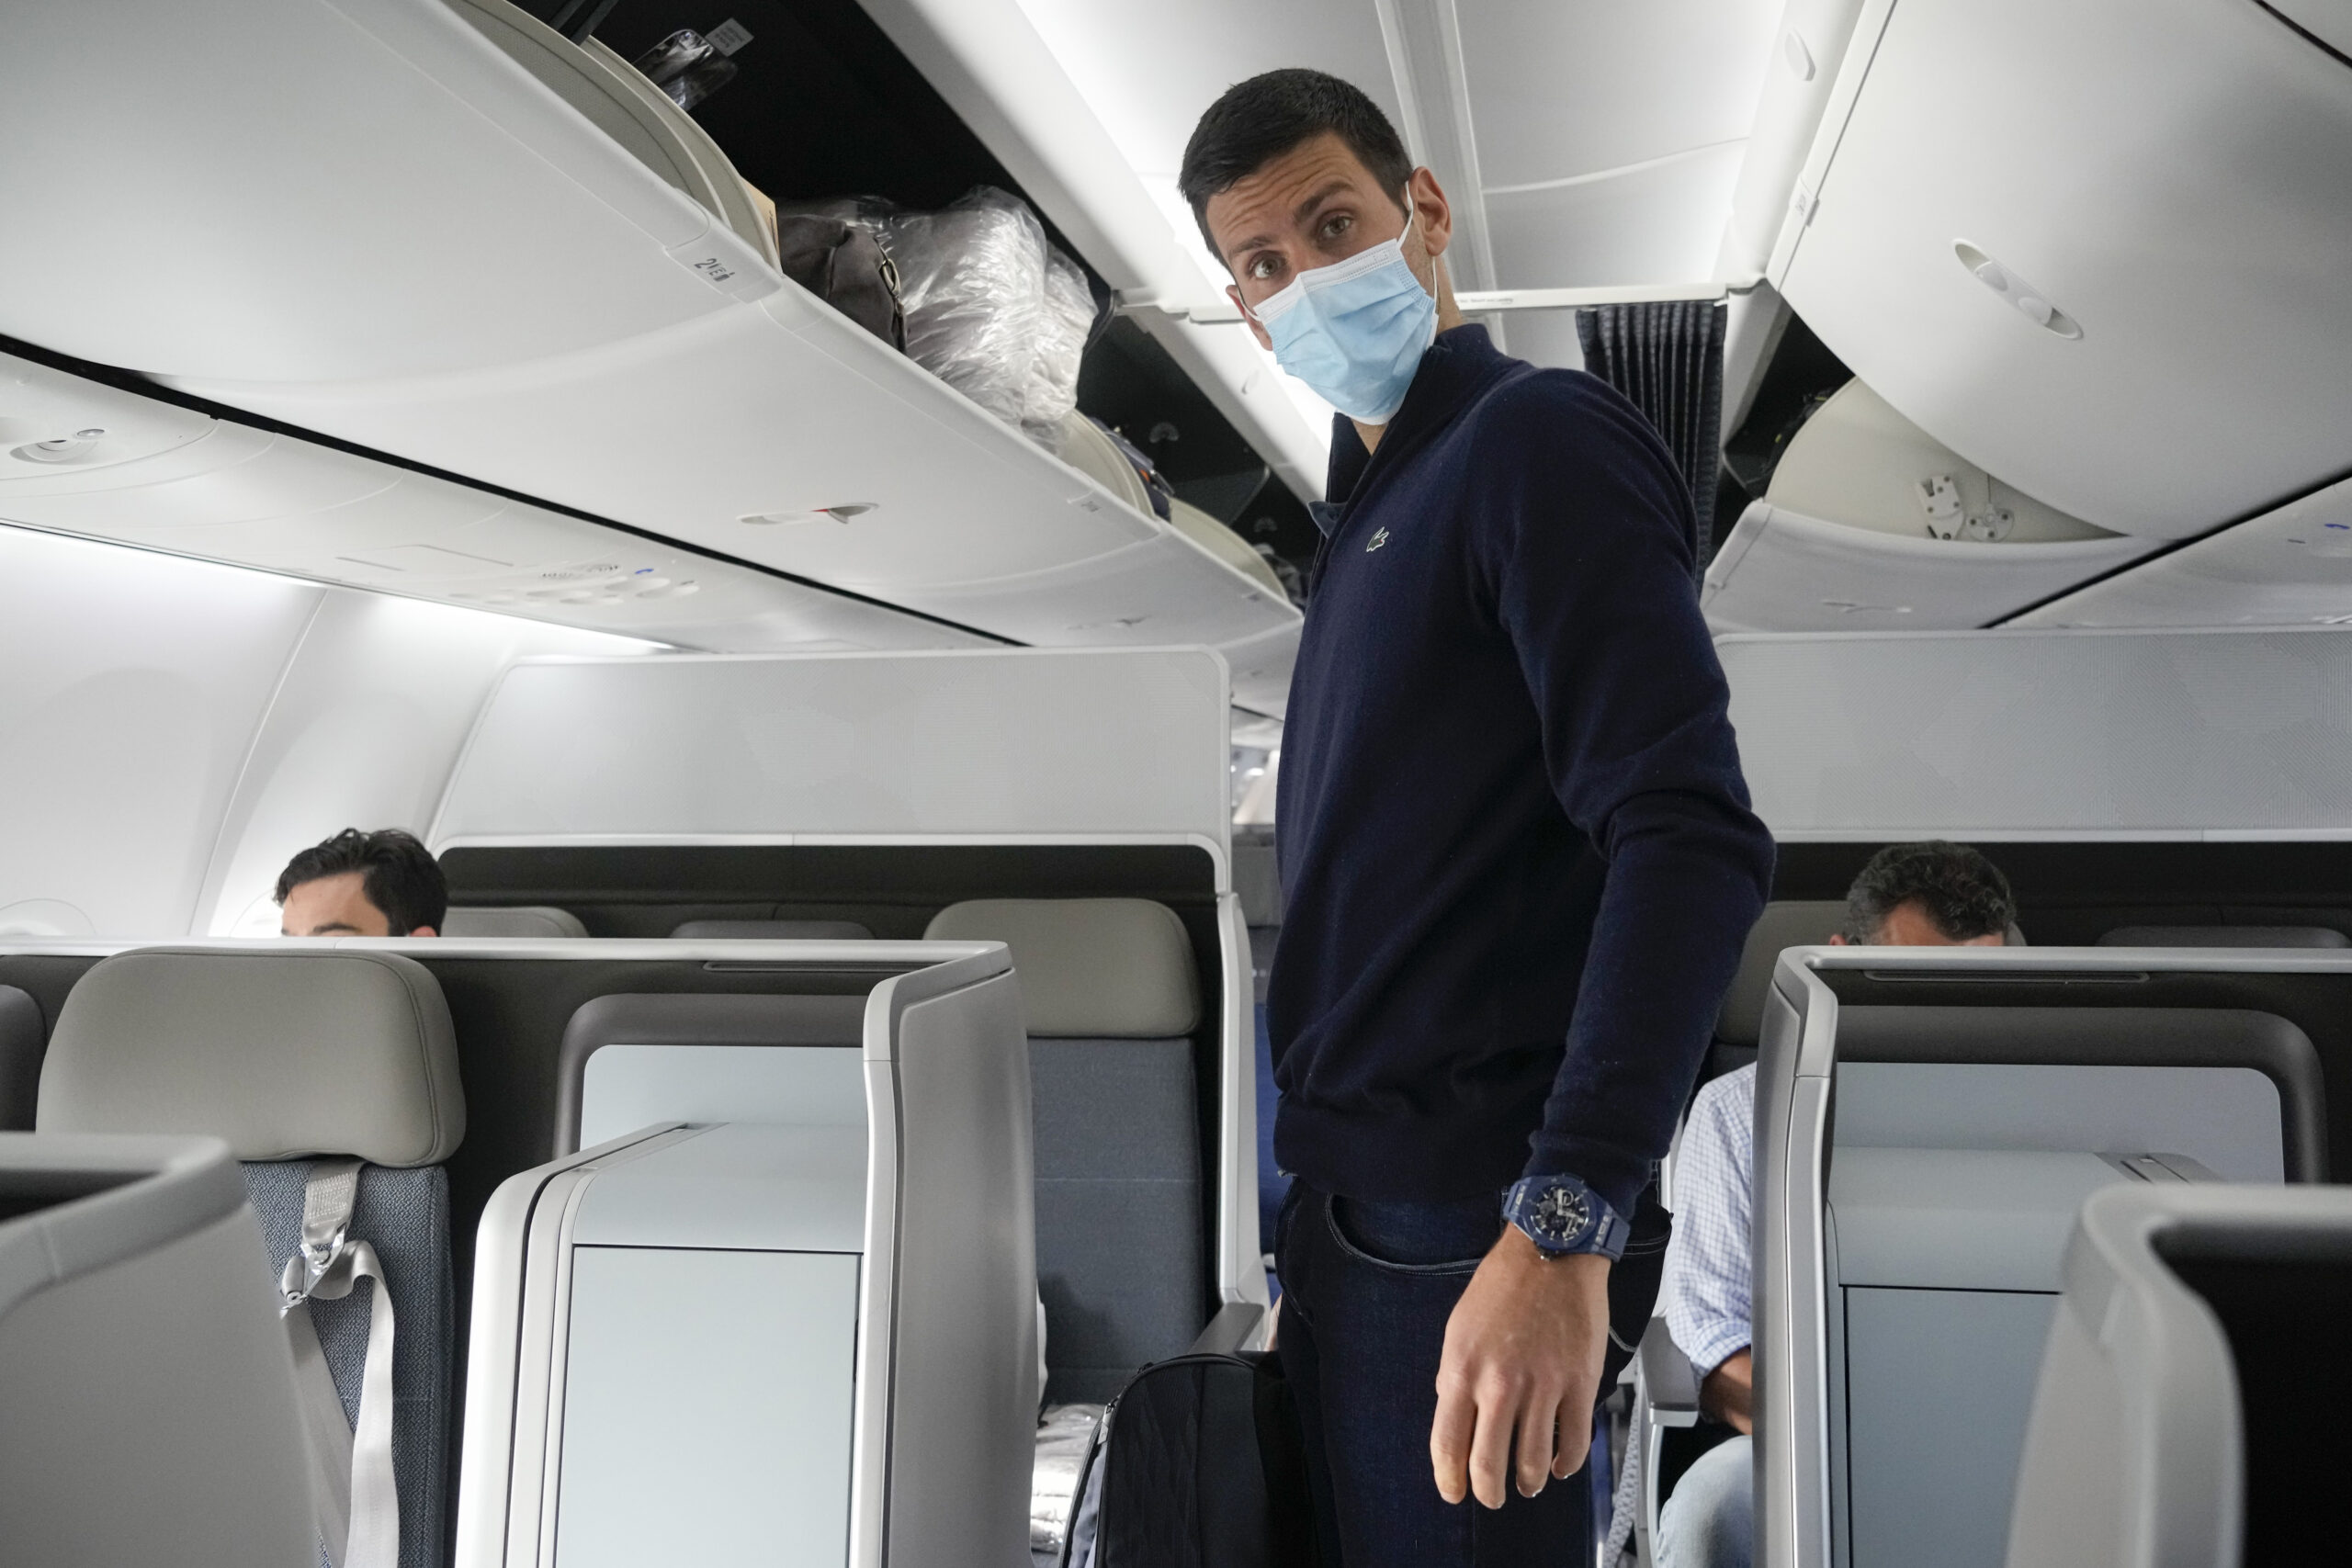 FILE - Novak Djokovic prepares to take his seat on a plane to Belgrade, in Dubai, United Arab Emirates, Monday, Jan. 17, 2022. Djokovic was deported from Australia after losing a bid to stay in the country to defend his Australian Open title despite not being vaccinated against COVID-19. Prime Minister Scott Morrison said on Monday, Feb. 7, 2022, that the border would reopen to all vaccinated visas holders from Feb. 21. (AP Photo/Darko Bandic, FILE)